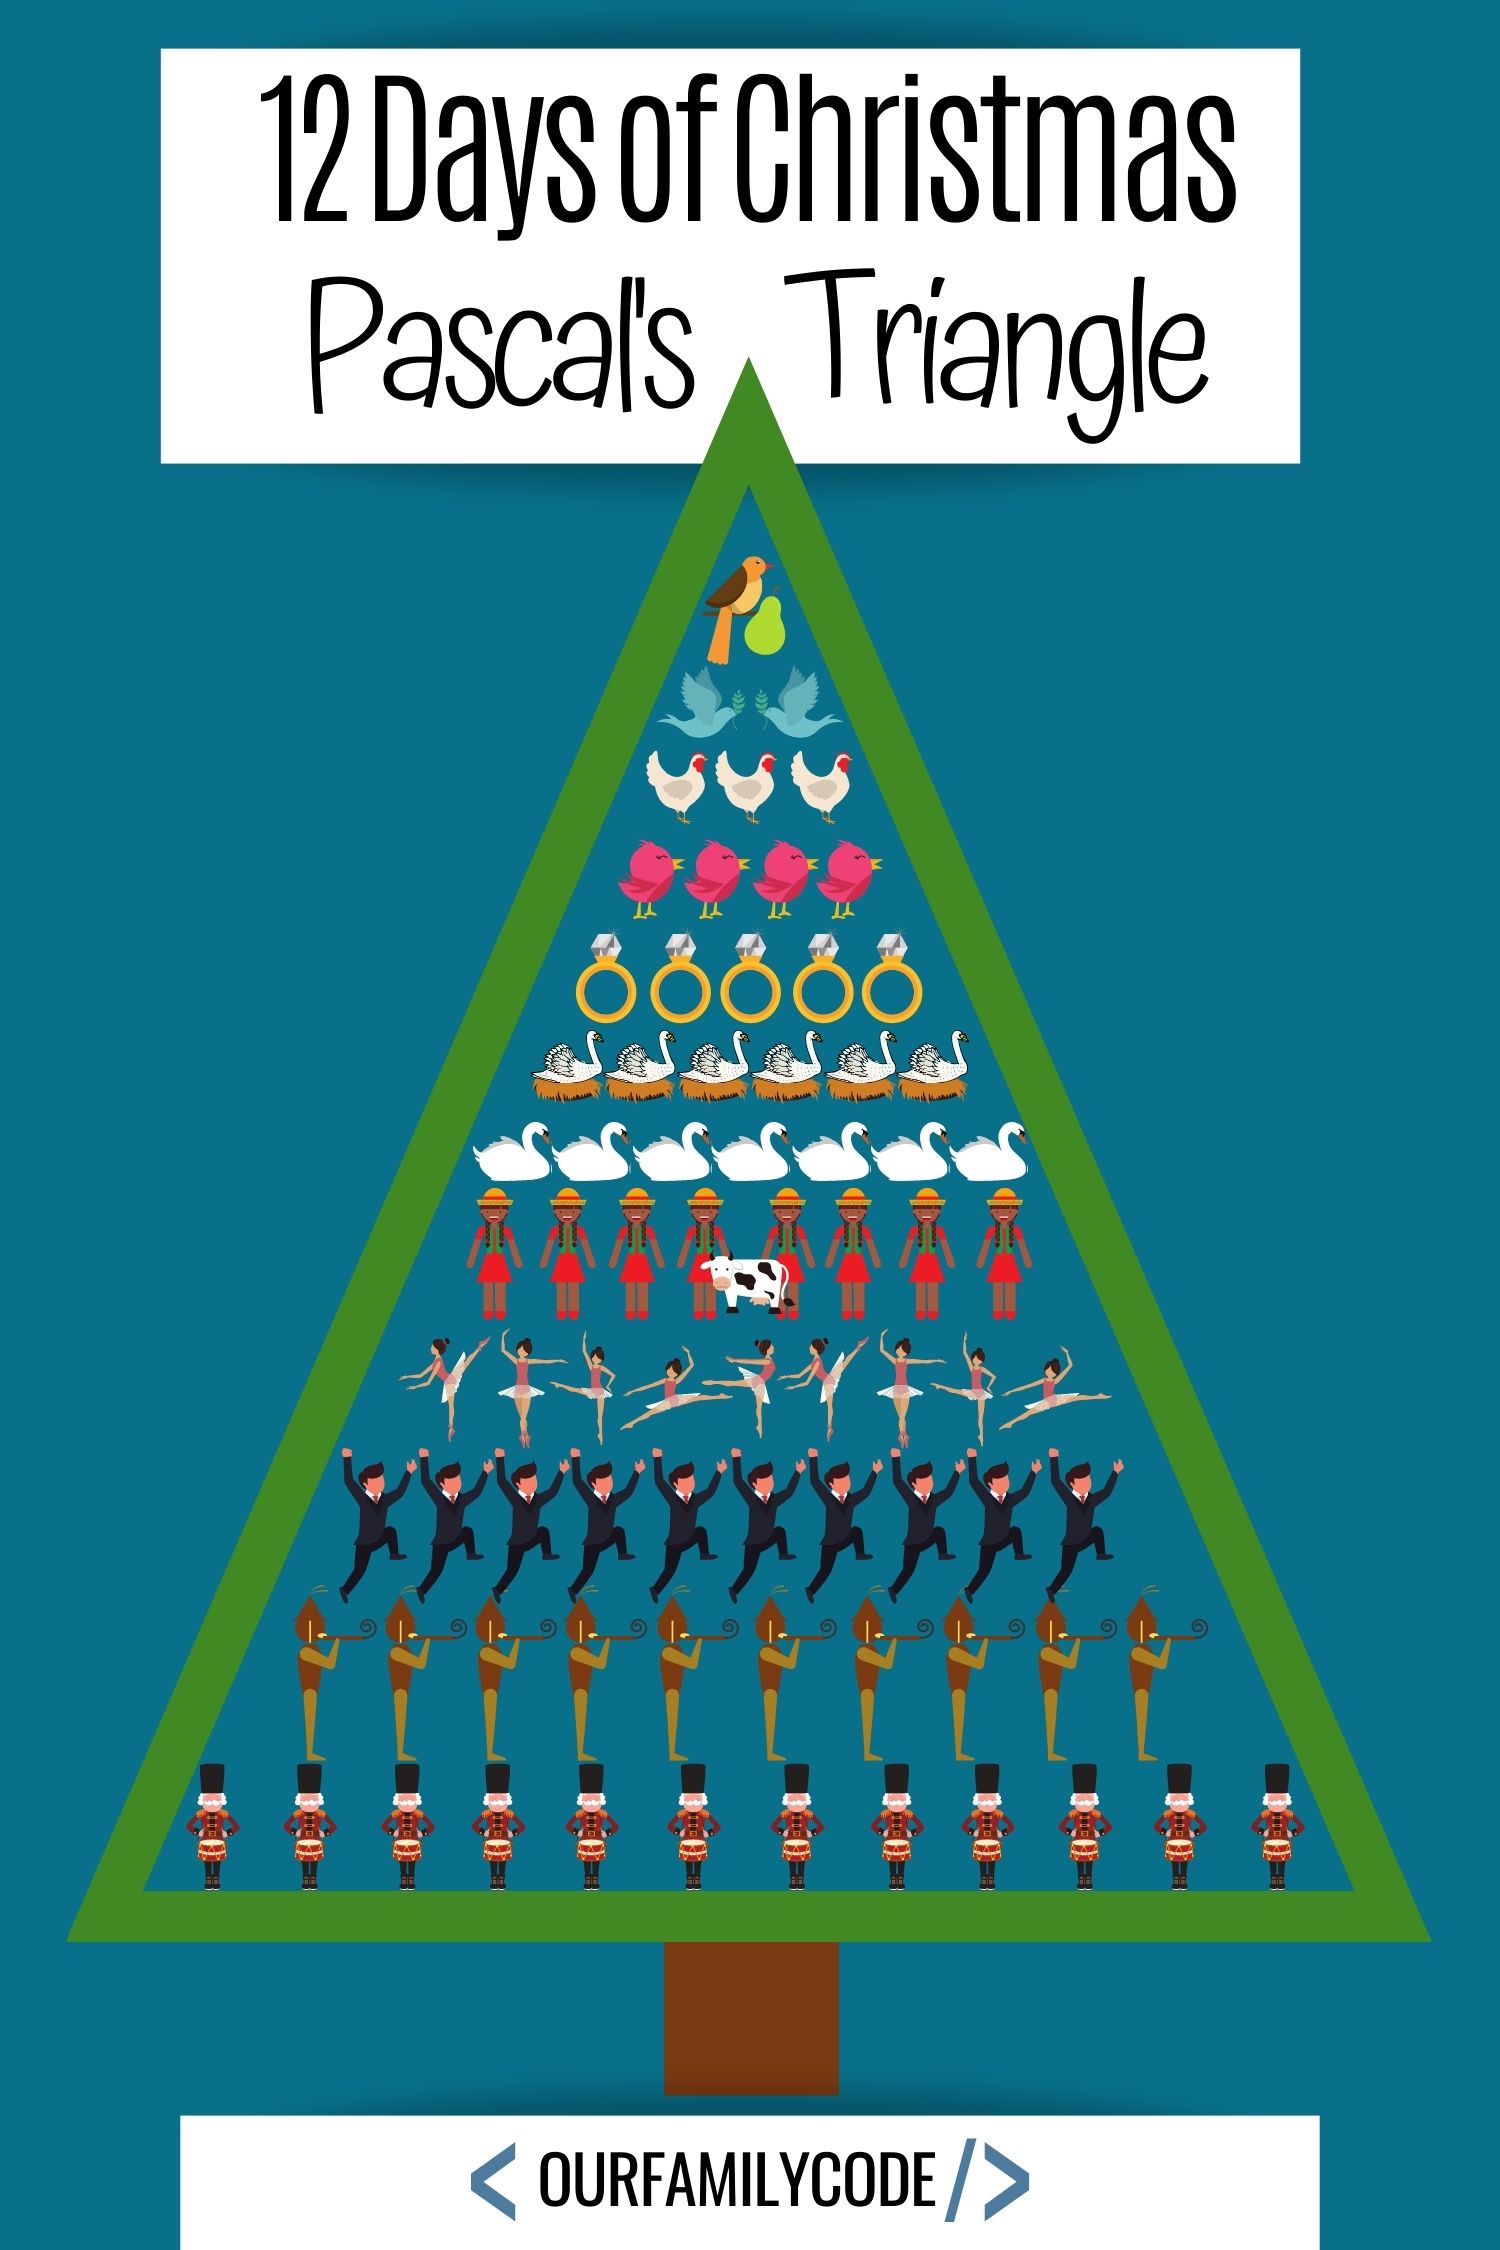 Figure out how many gifts are given in the 12 Days of Christmas with Pascal's Triangle #Christmas #math #pascalstriangle #STEM #STEAM